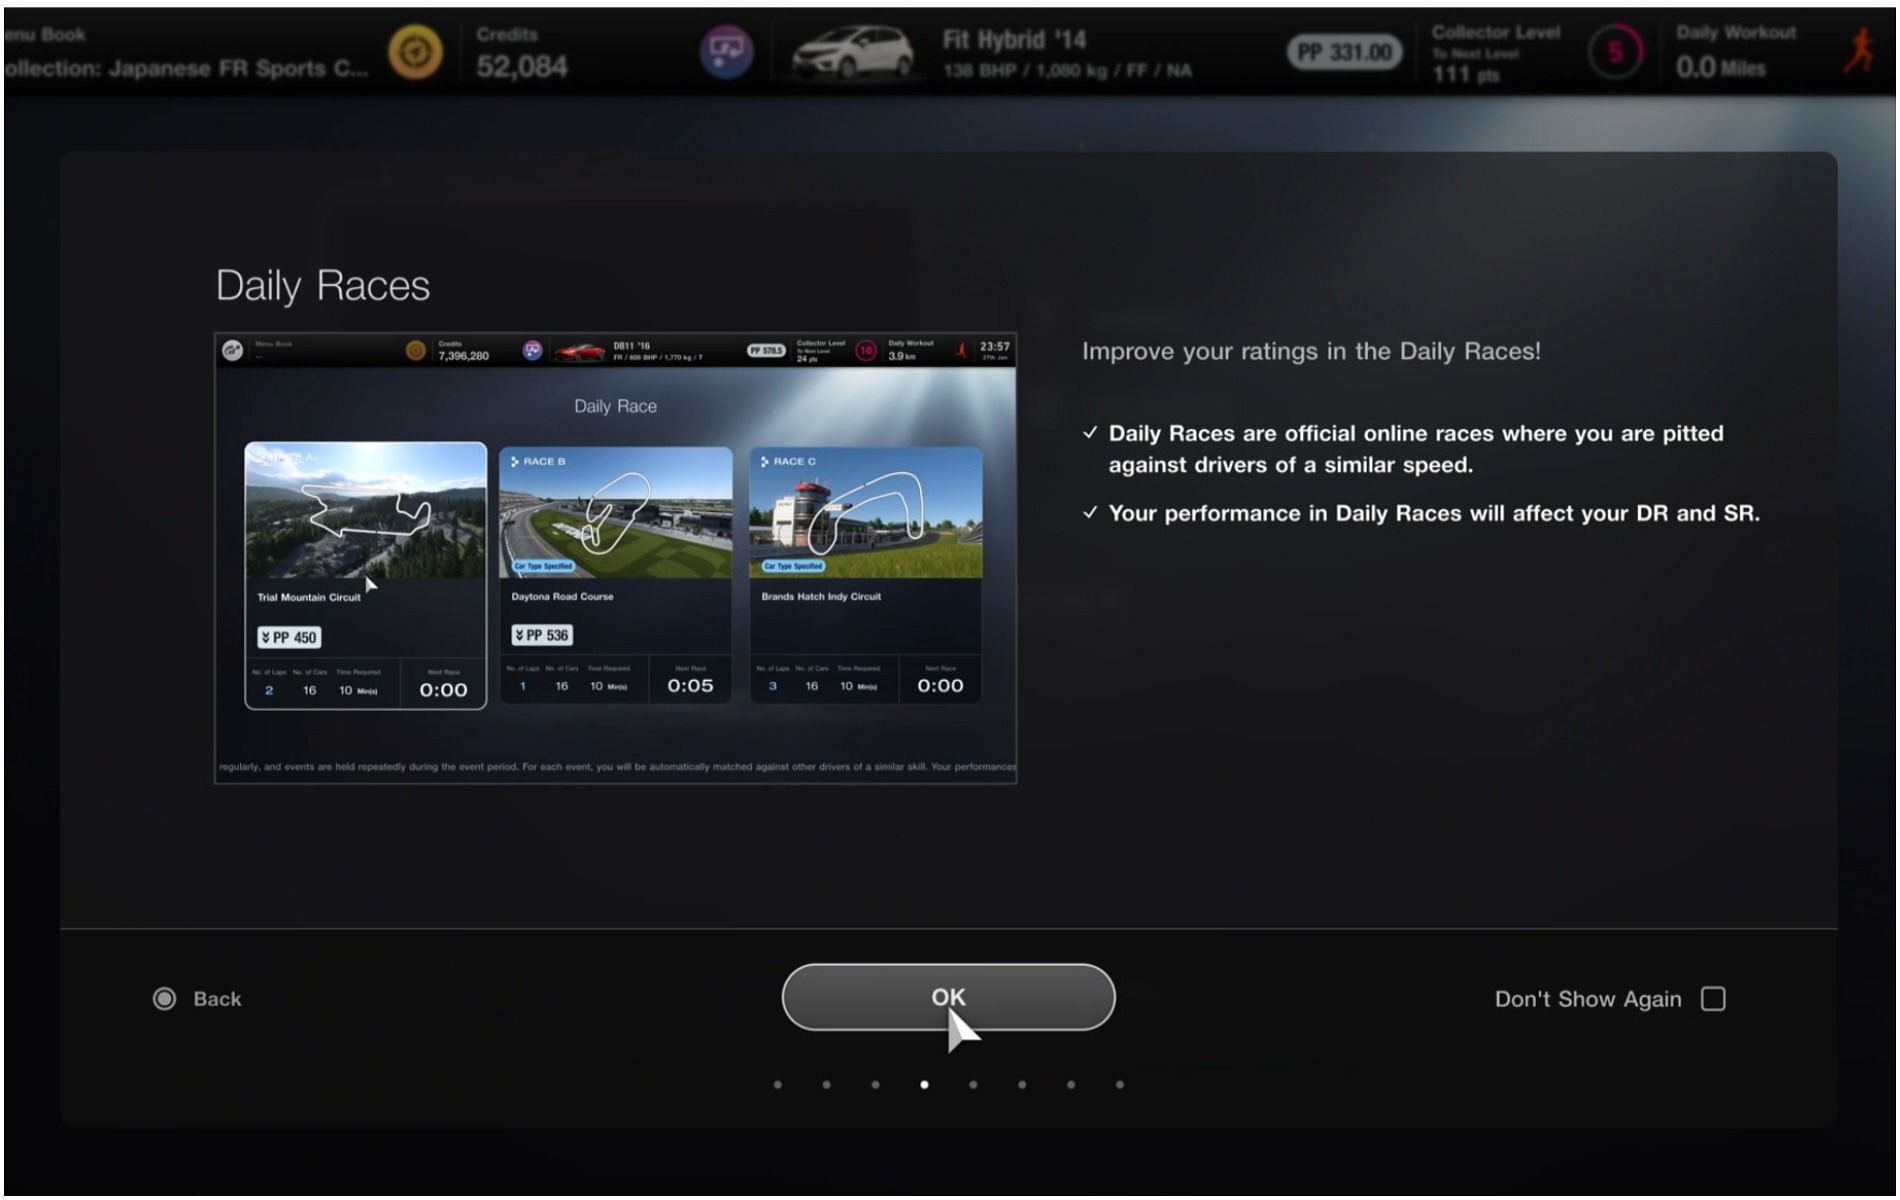 How to unlock multiplayer in Gran Turismo 7